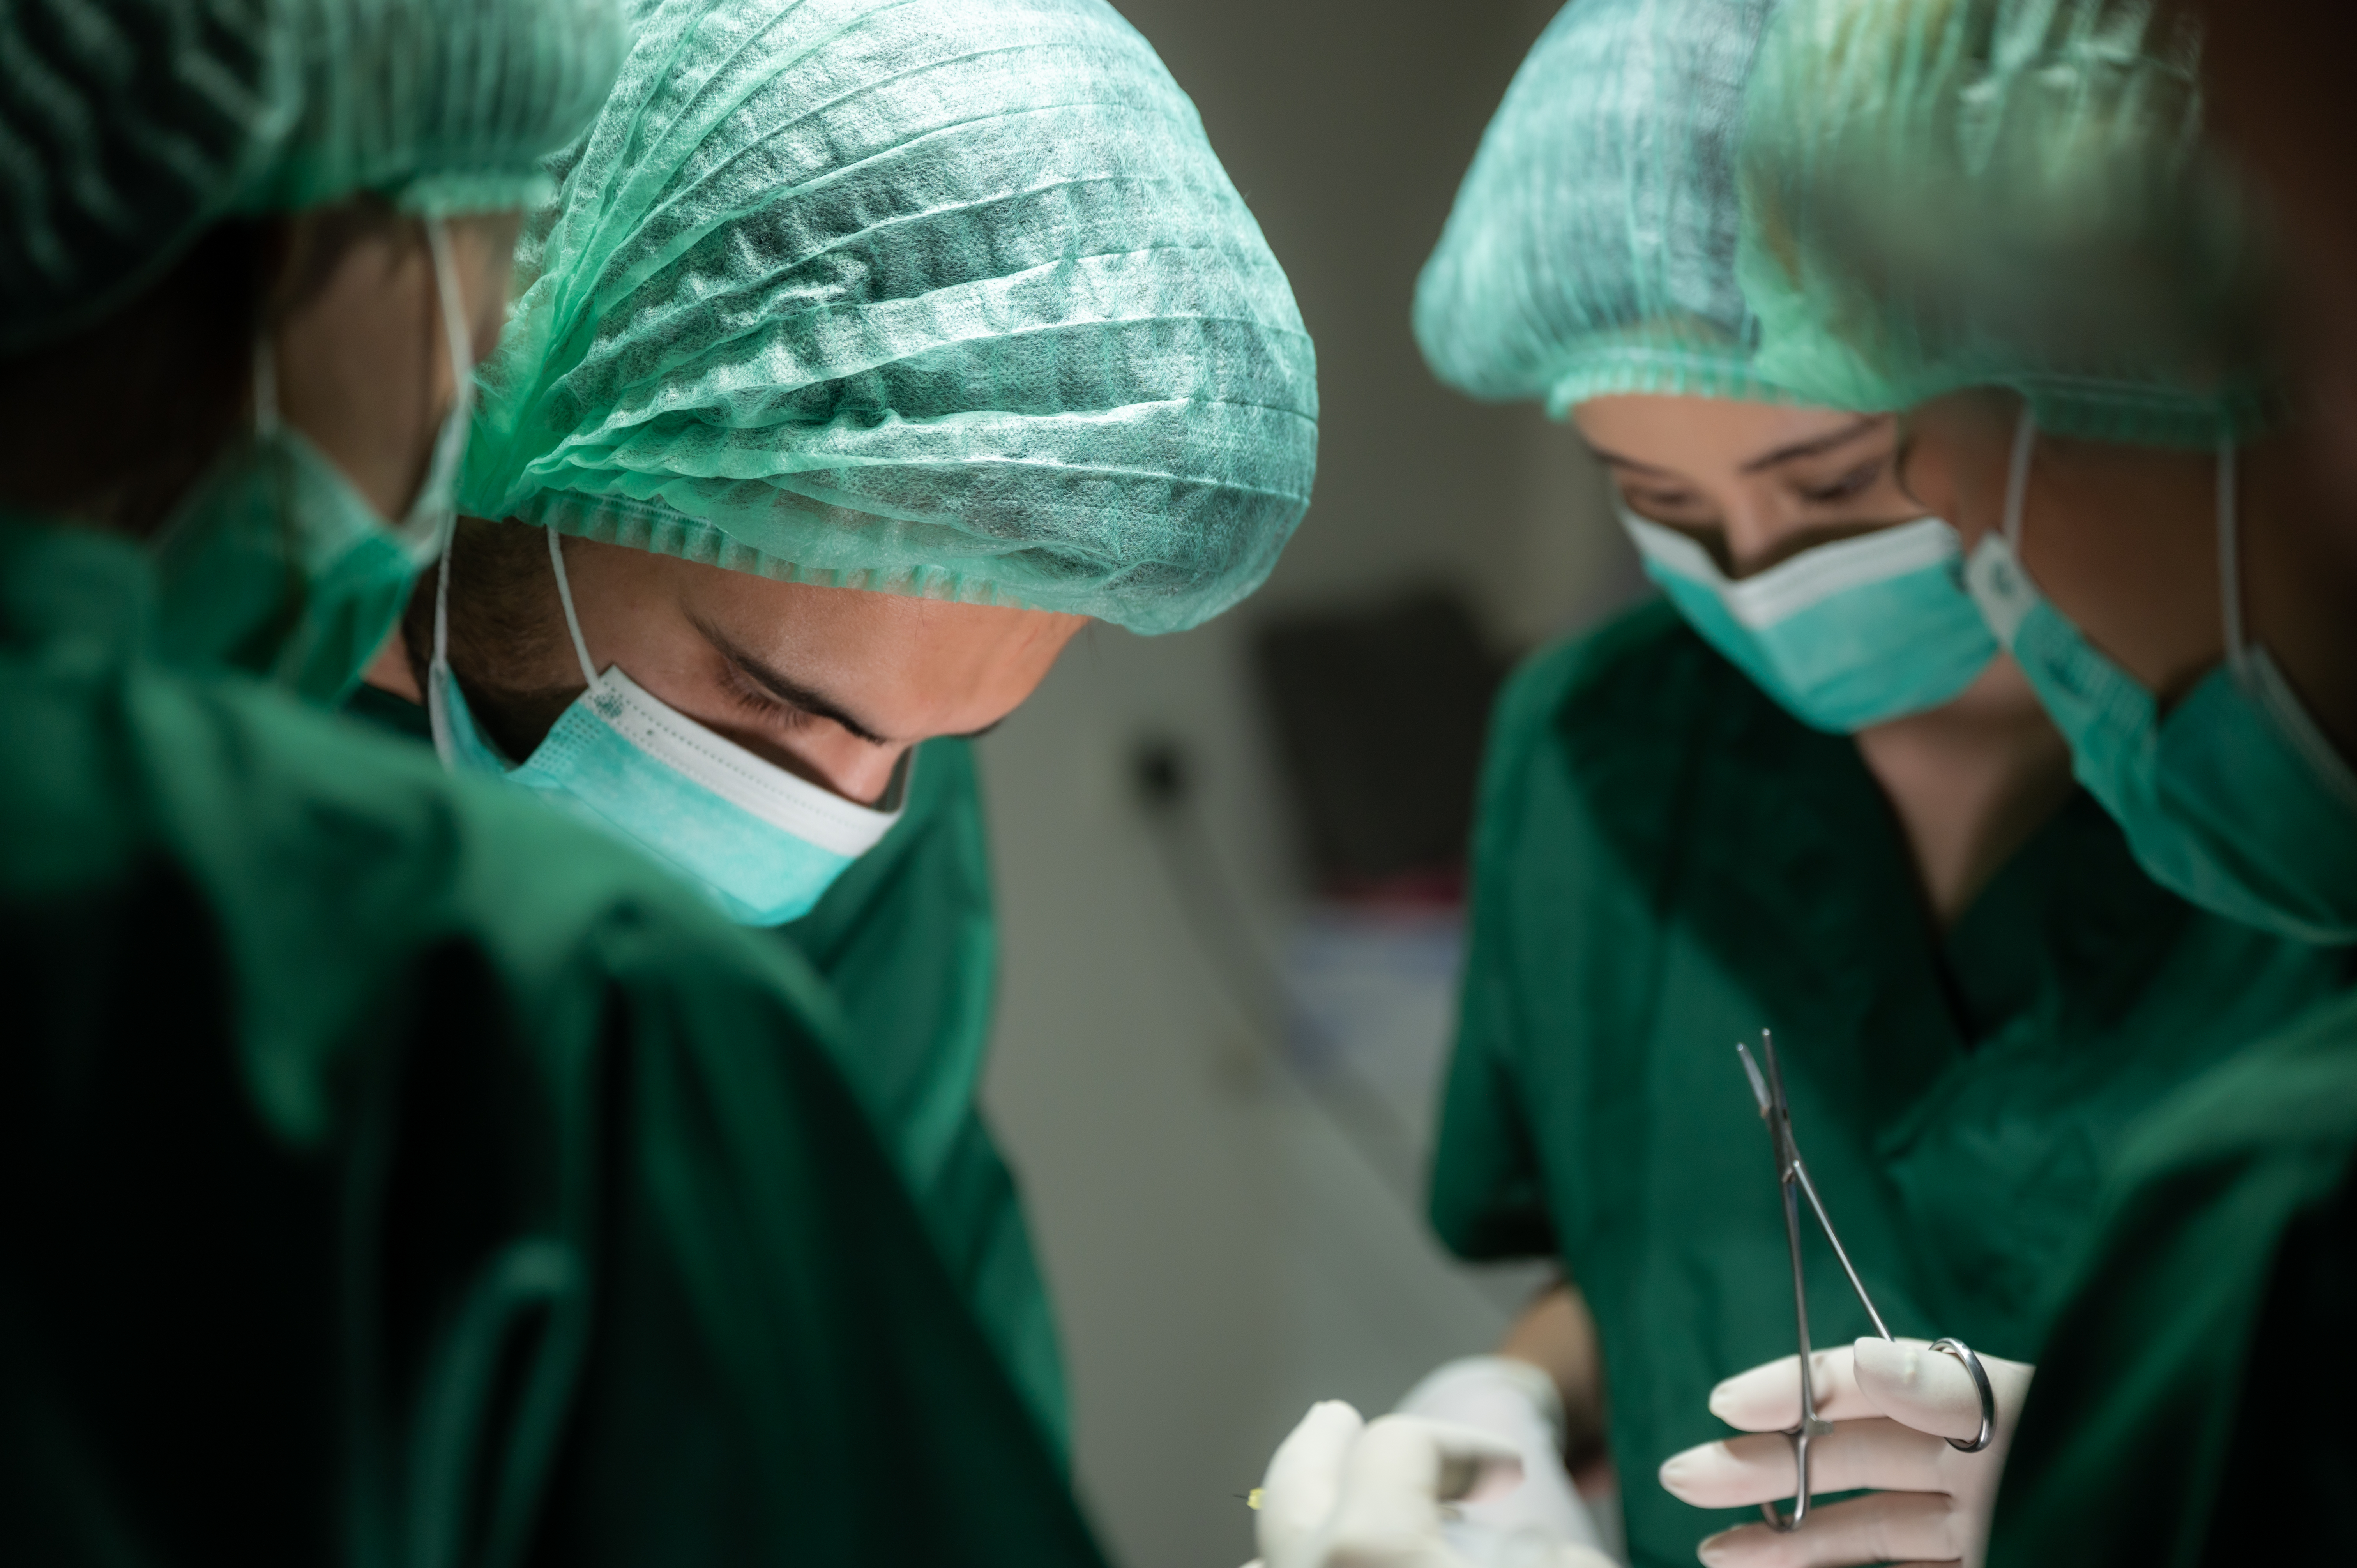 Four surgeons wearing green scrubs and masks and holding surgical tools perform an operation. (Source: envato)